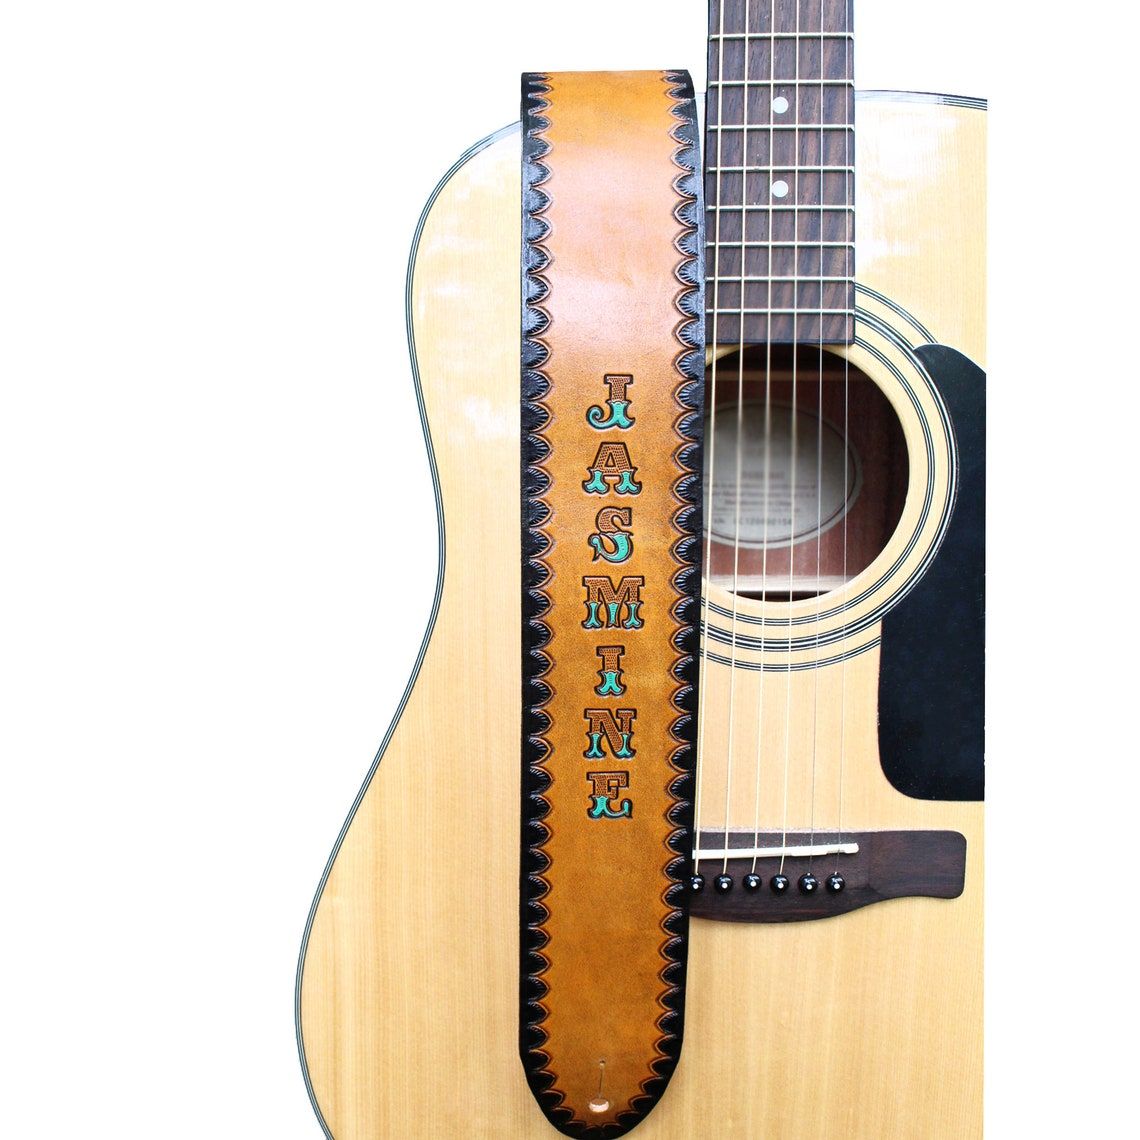 Buy Custom Personalized Tan Leather Guitar Strap With Black Border, made to  order from The Leather Smithy